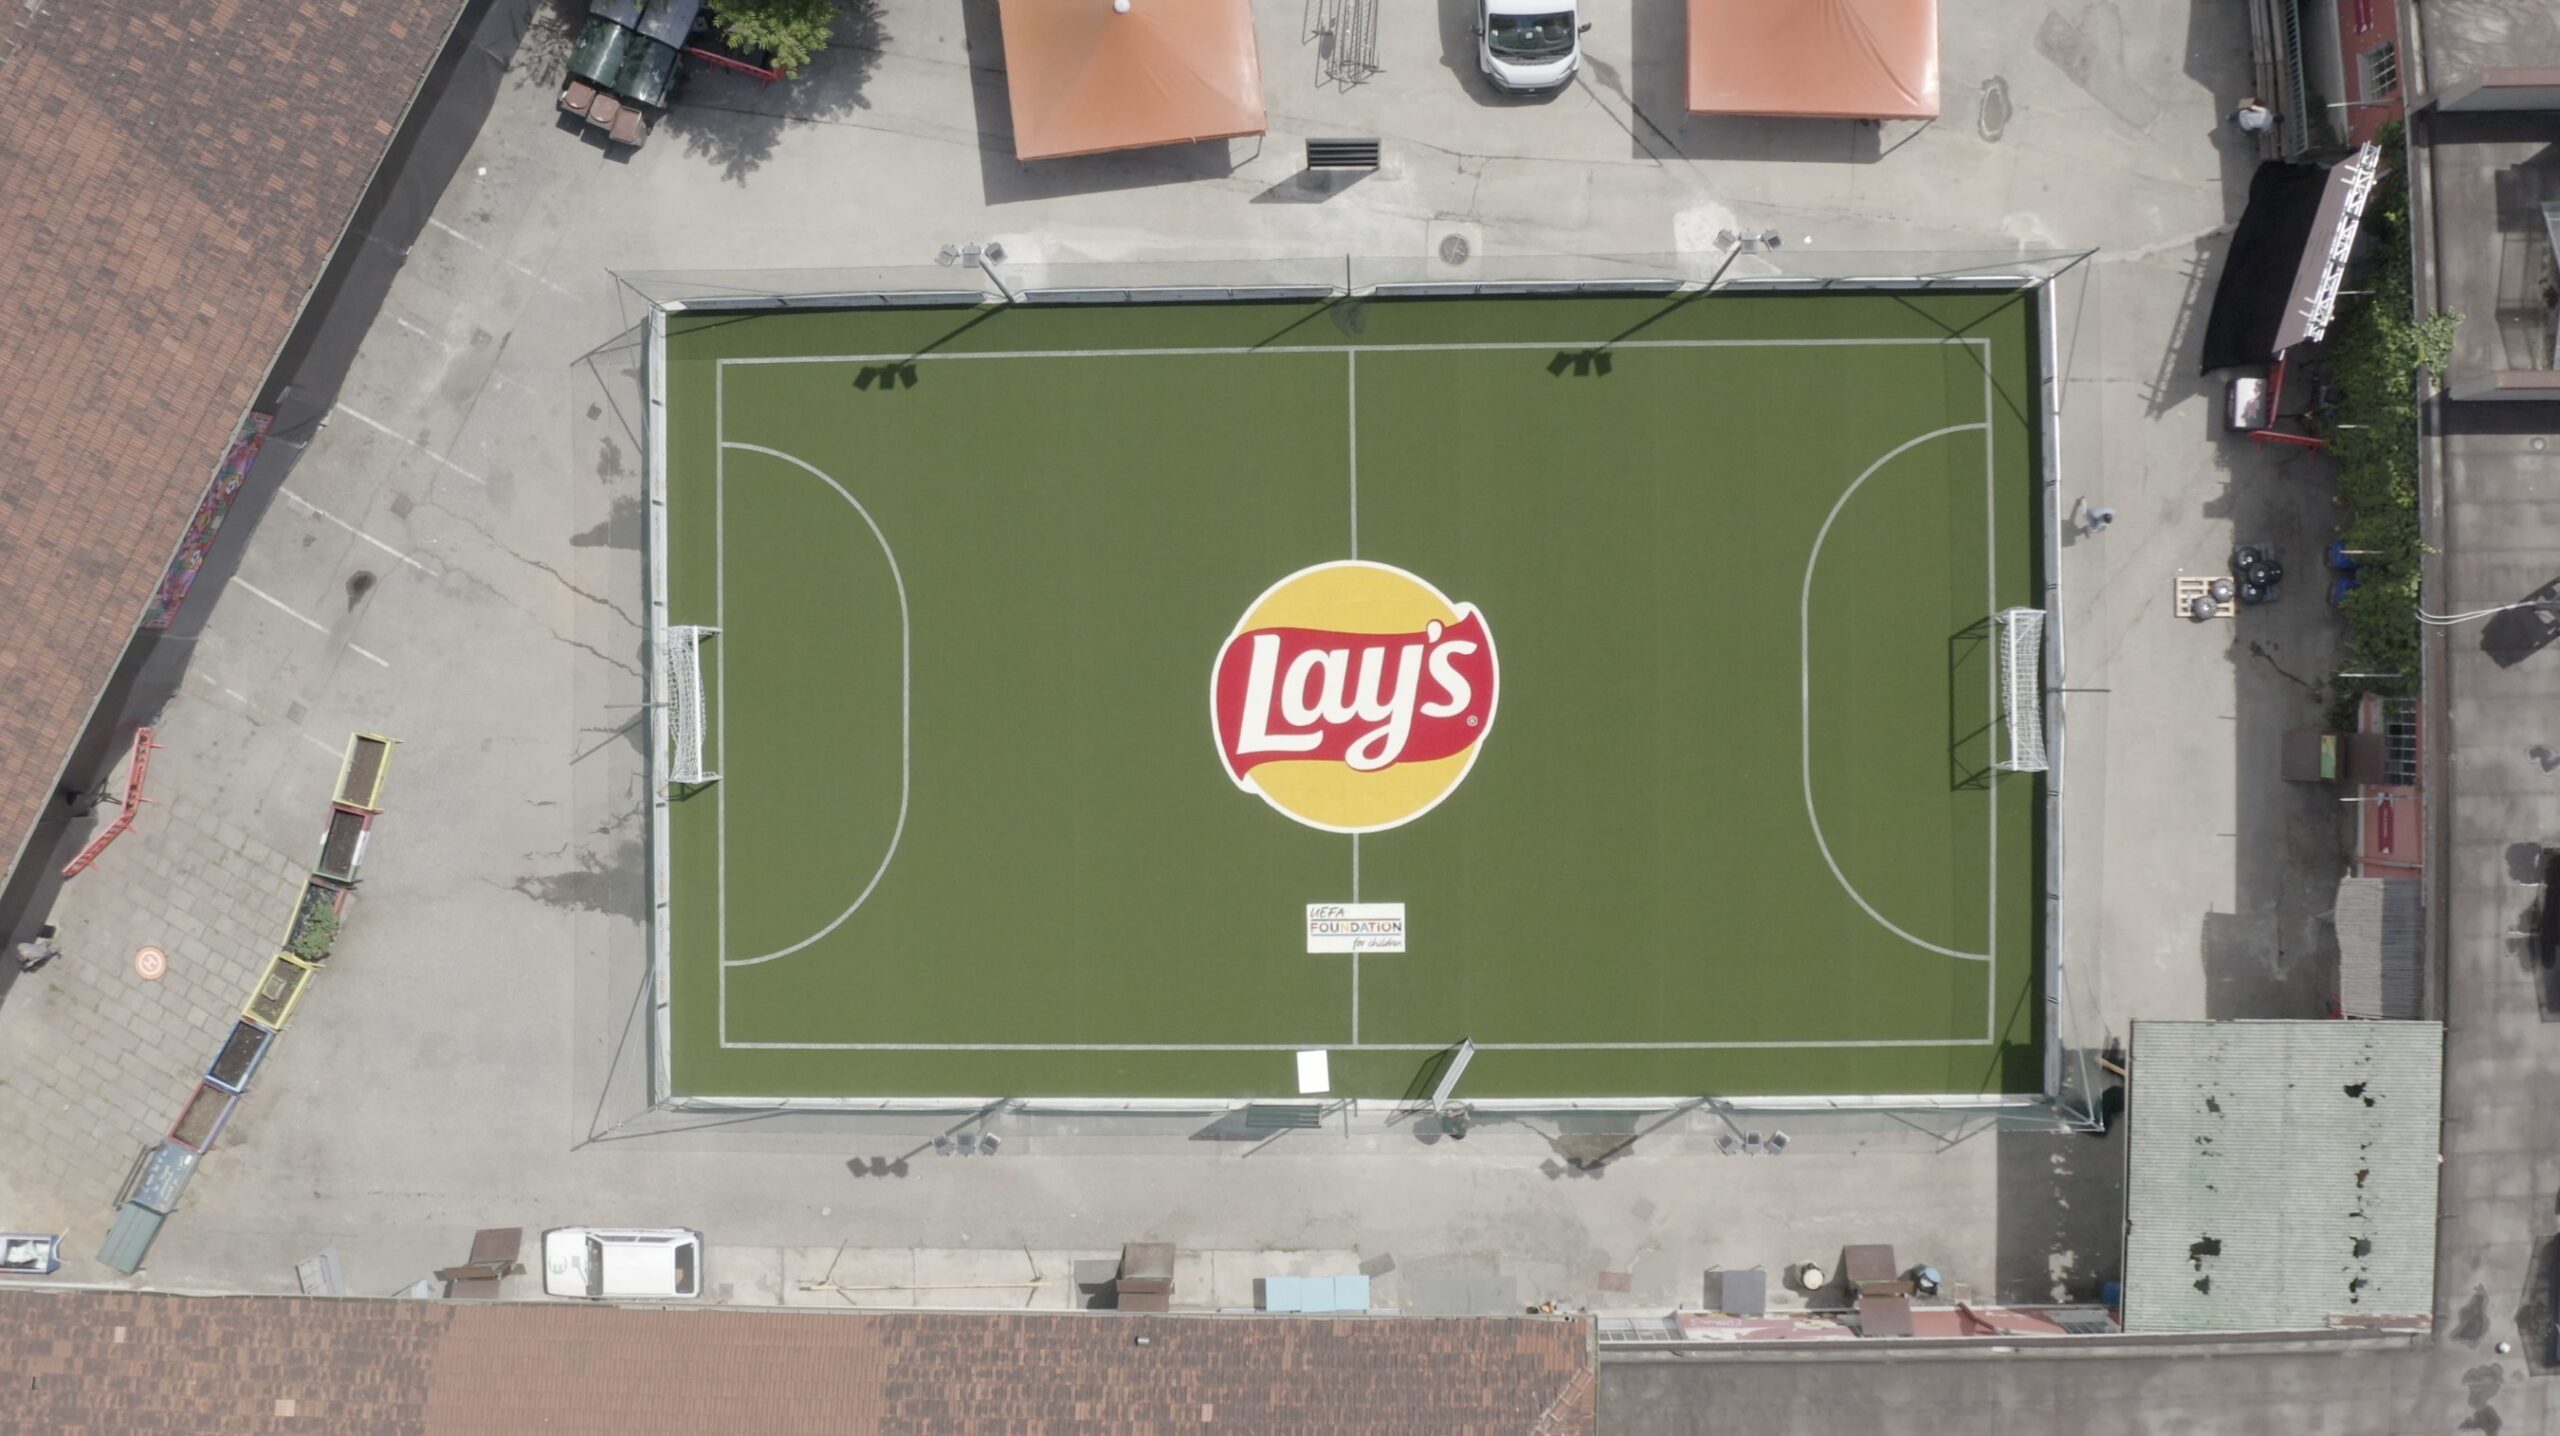 Lays-RePlay-pitch-Womens-UEFA